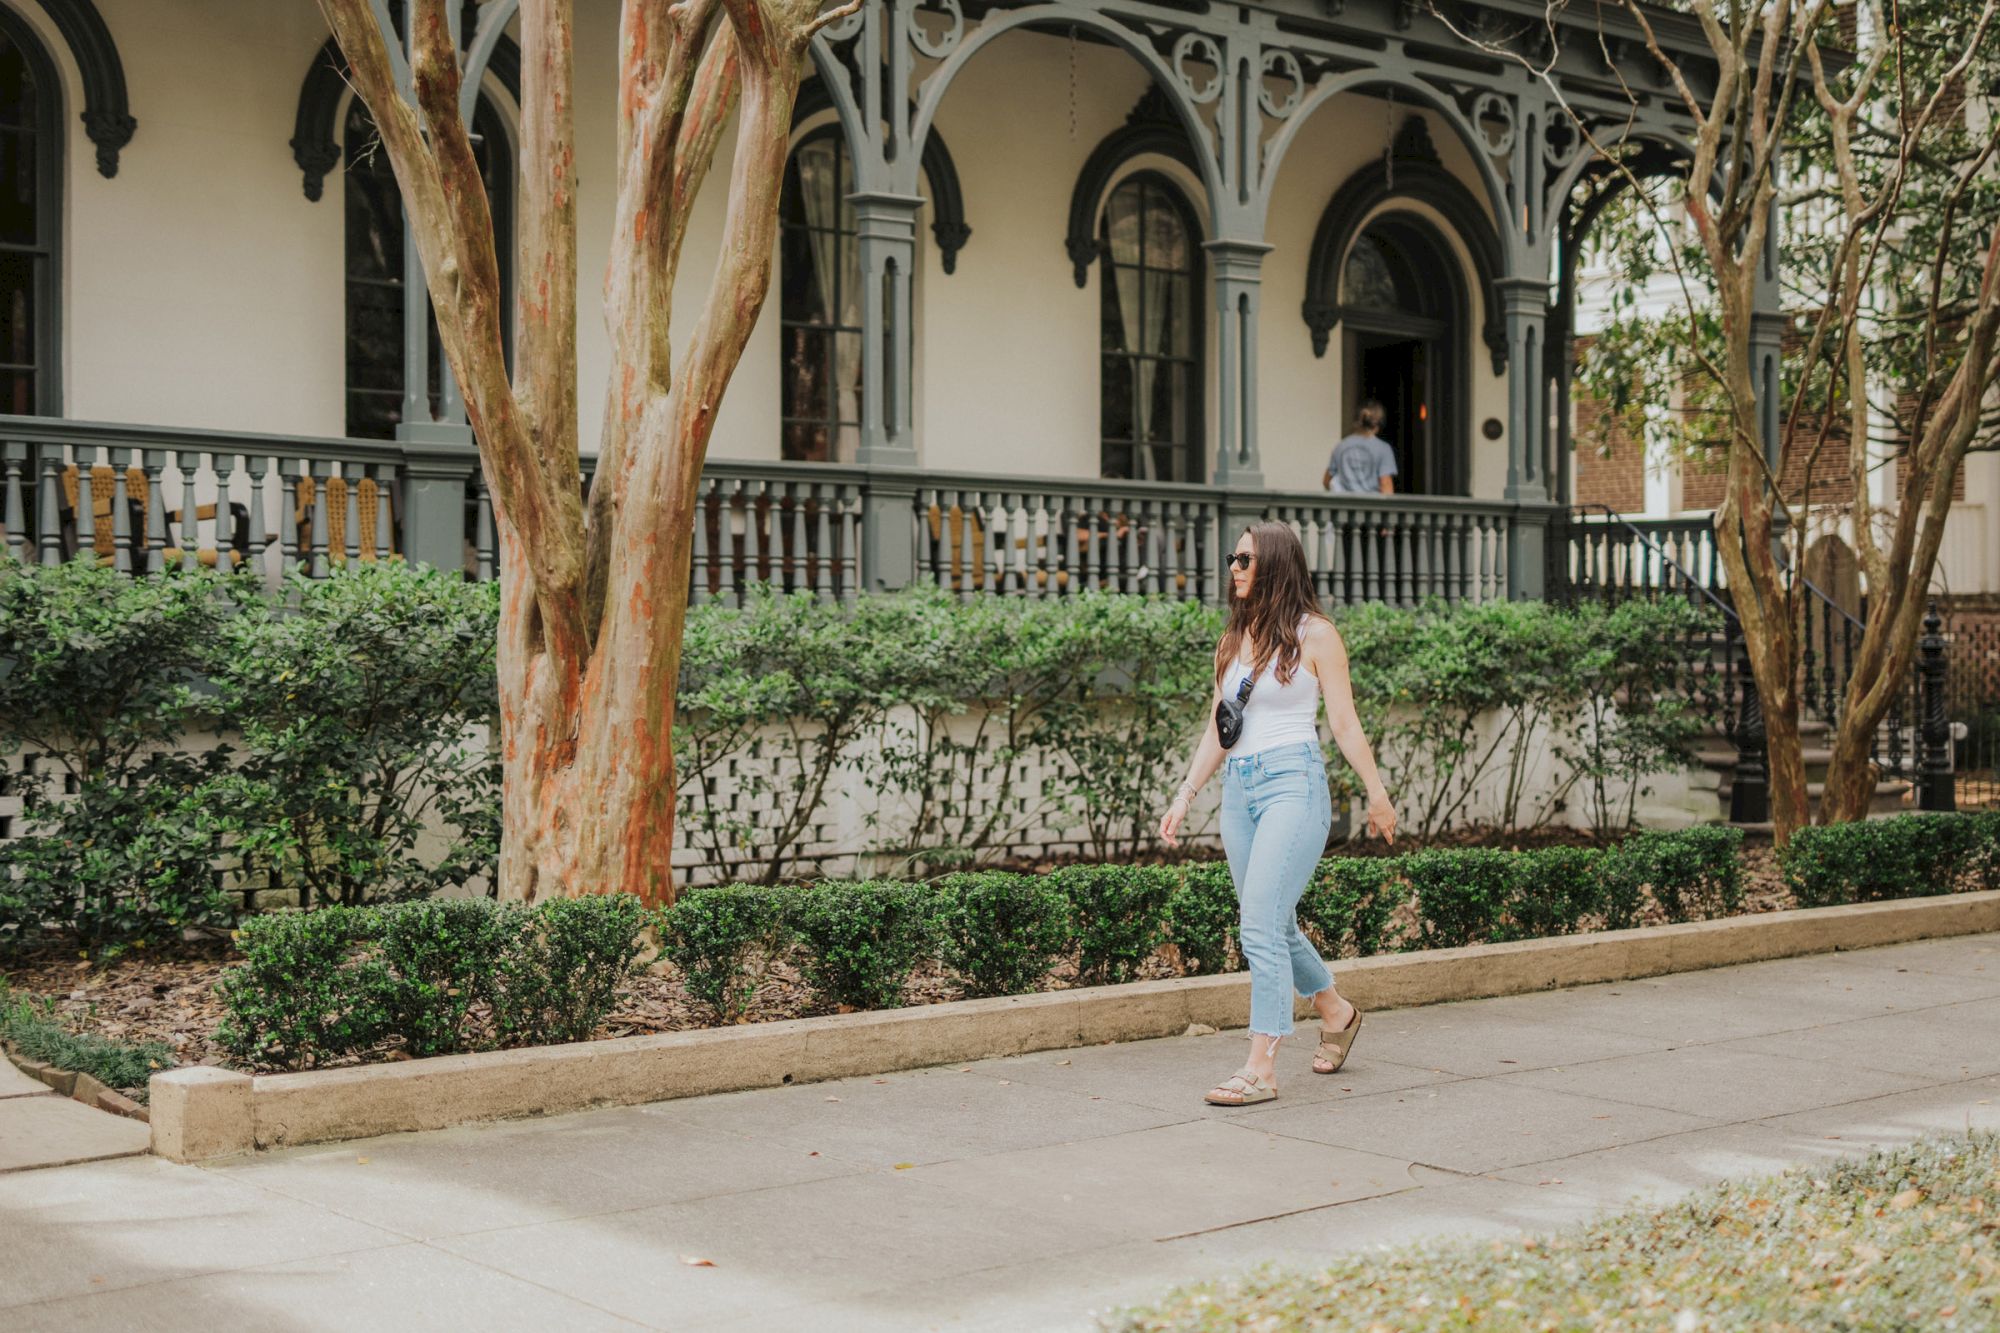 A woman is walking on a sidewalk in front of a building with a large porch and detailed architecture, surrounded by greenery, ending the sentence.